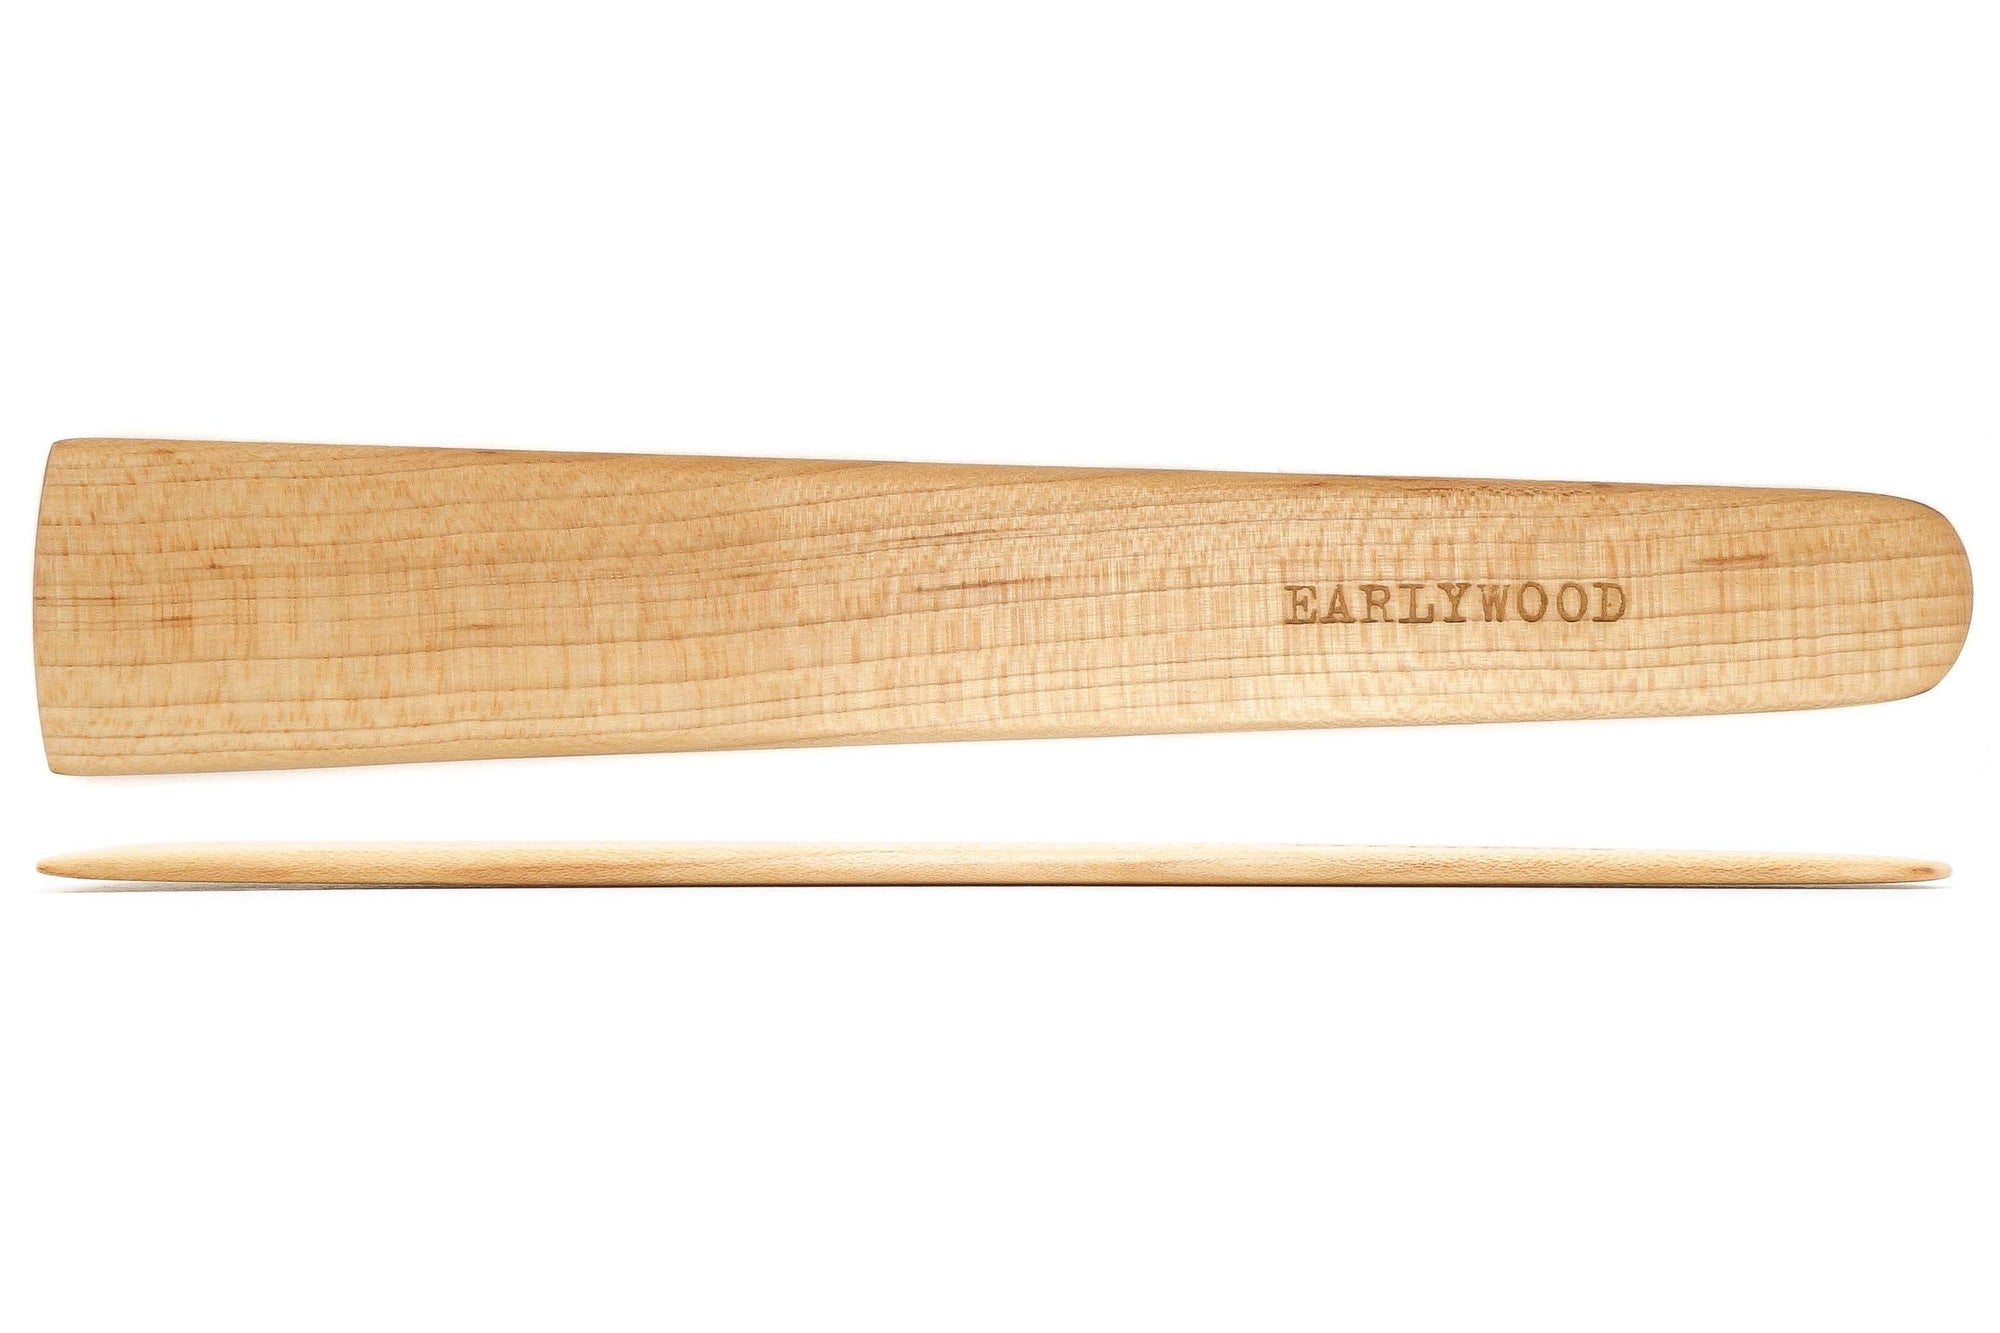 small wood spatula by Earlywood made of hard maple